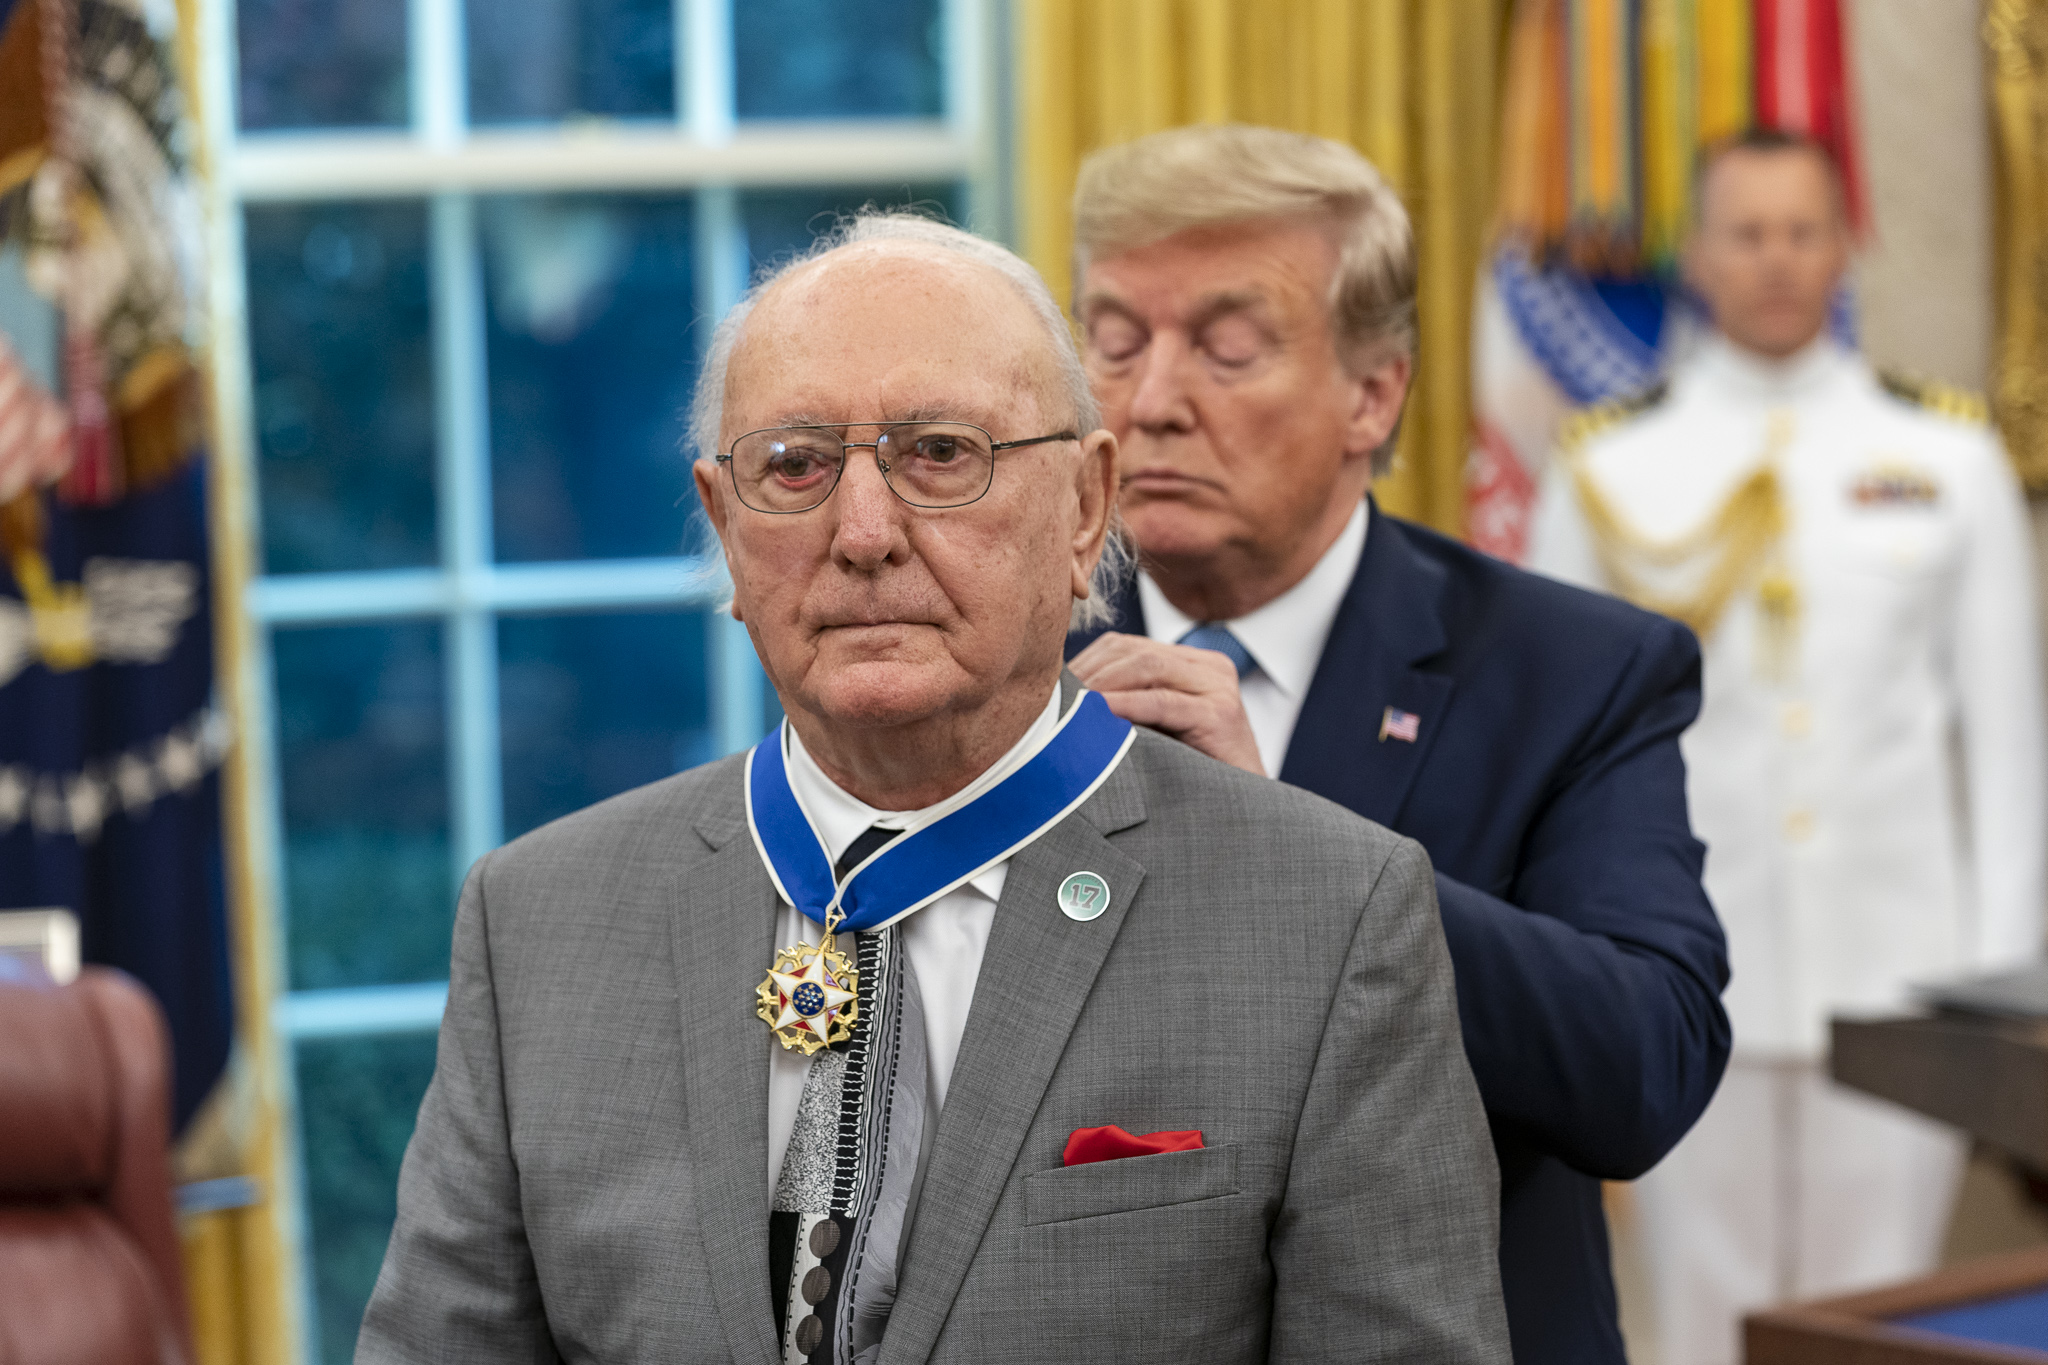 President_Trump_Presents_the_Medal_of_Freedom_to_Bob_Cousy_%2848602862221%29.jpg